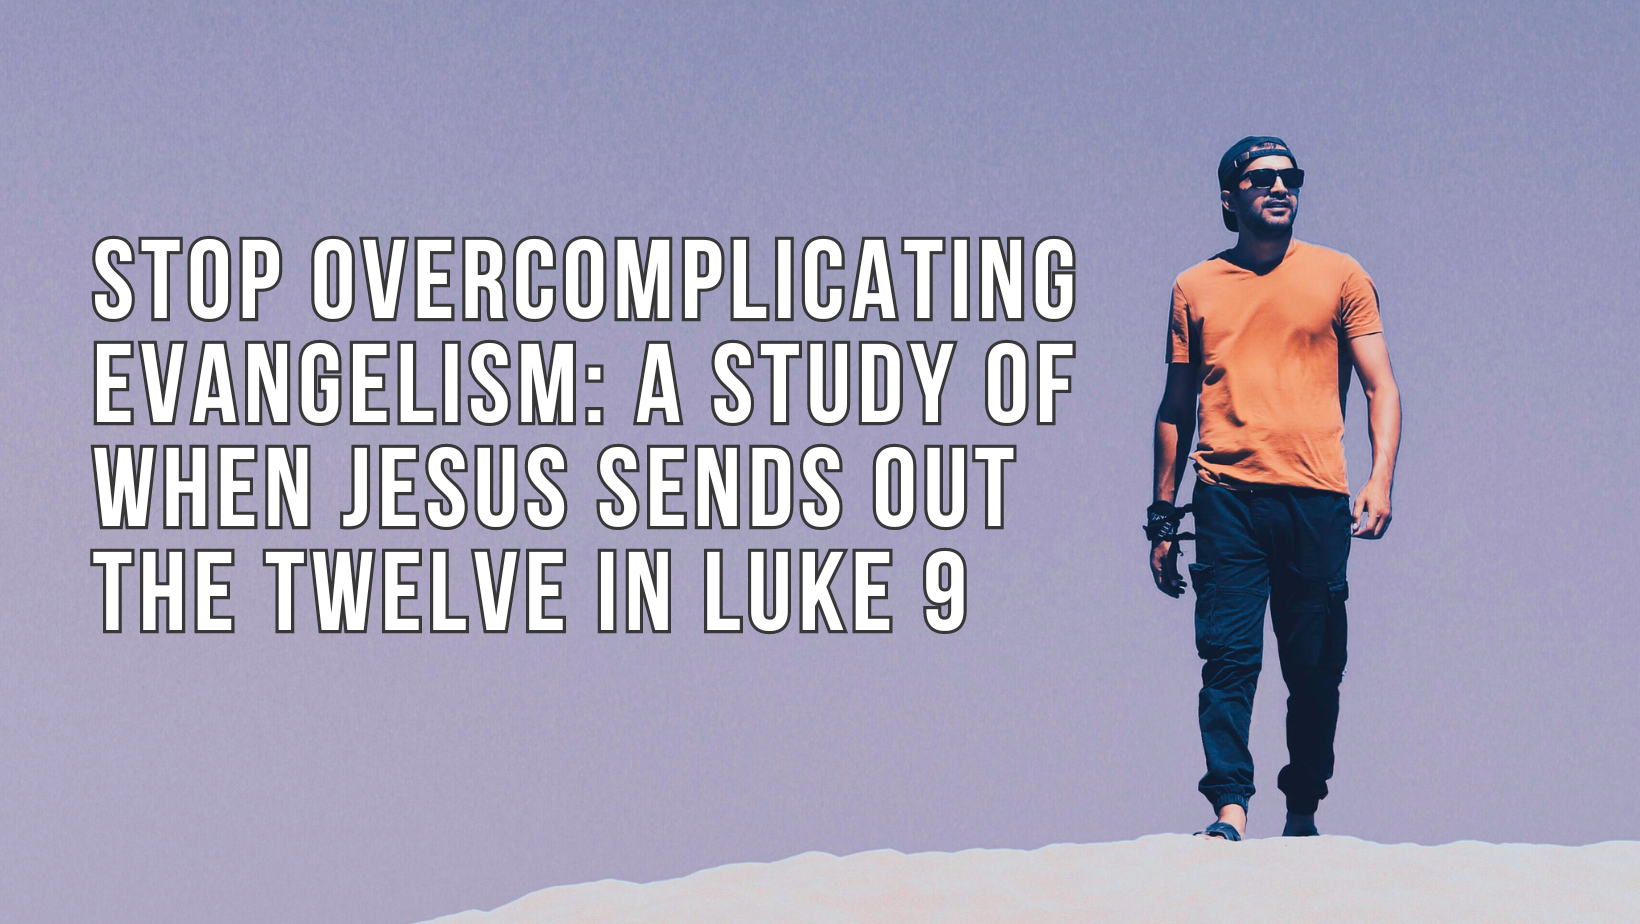 Stop overcomplicating evangelism: A study of when Jesus sends out the twelve in Luke 9